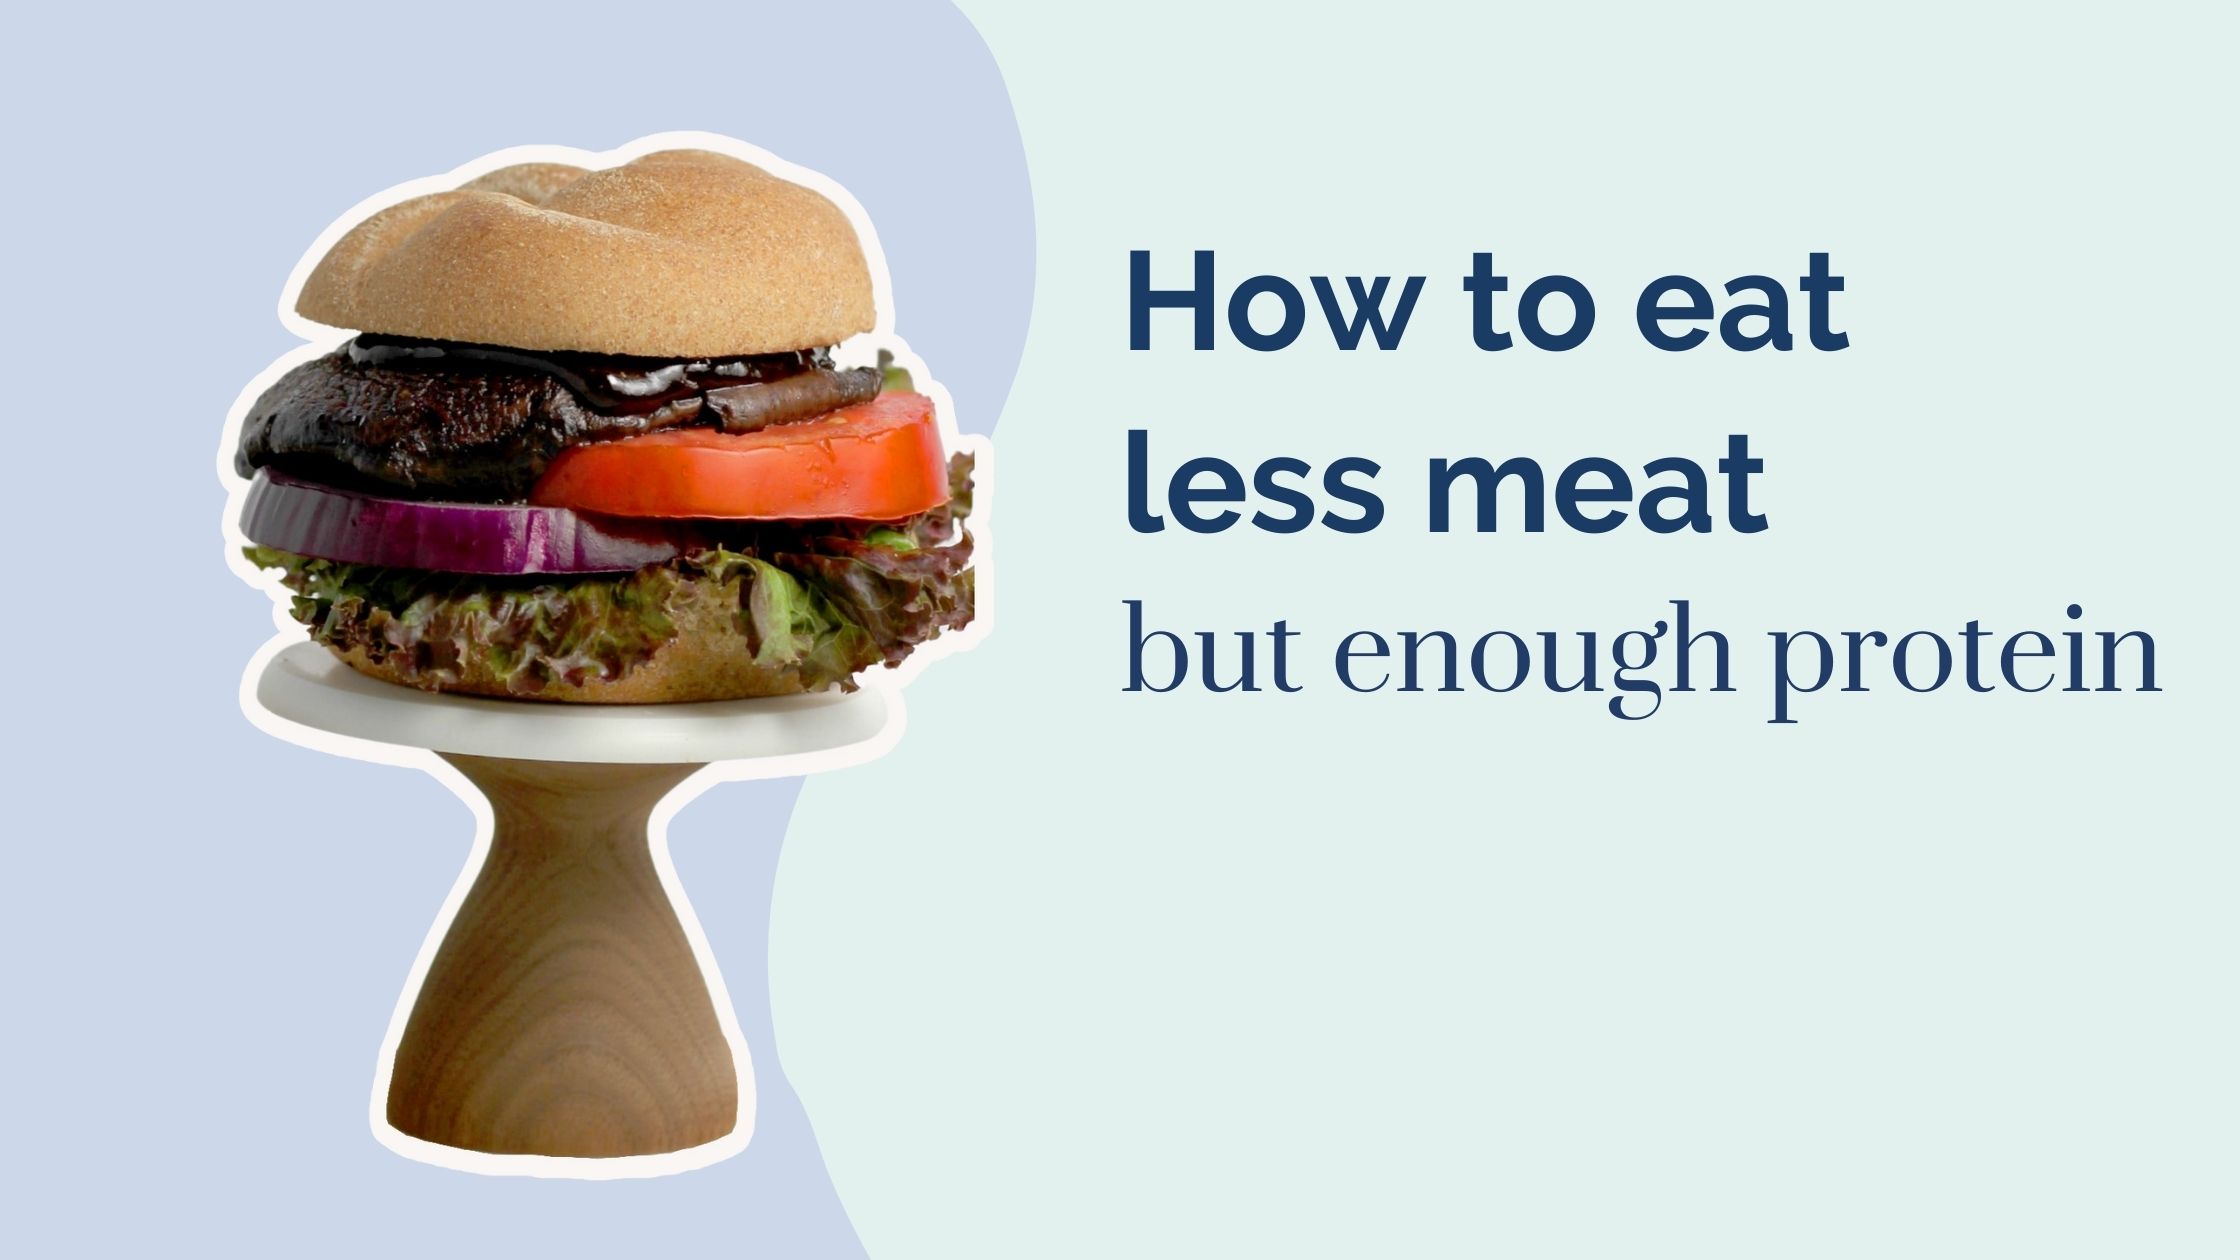 How to eat less meat - healthily (plant protein). Image: Unsplash